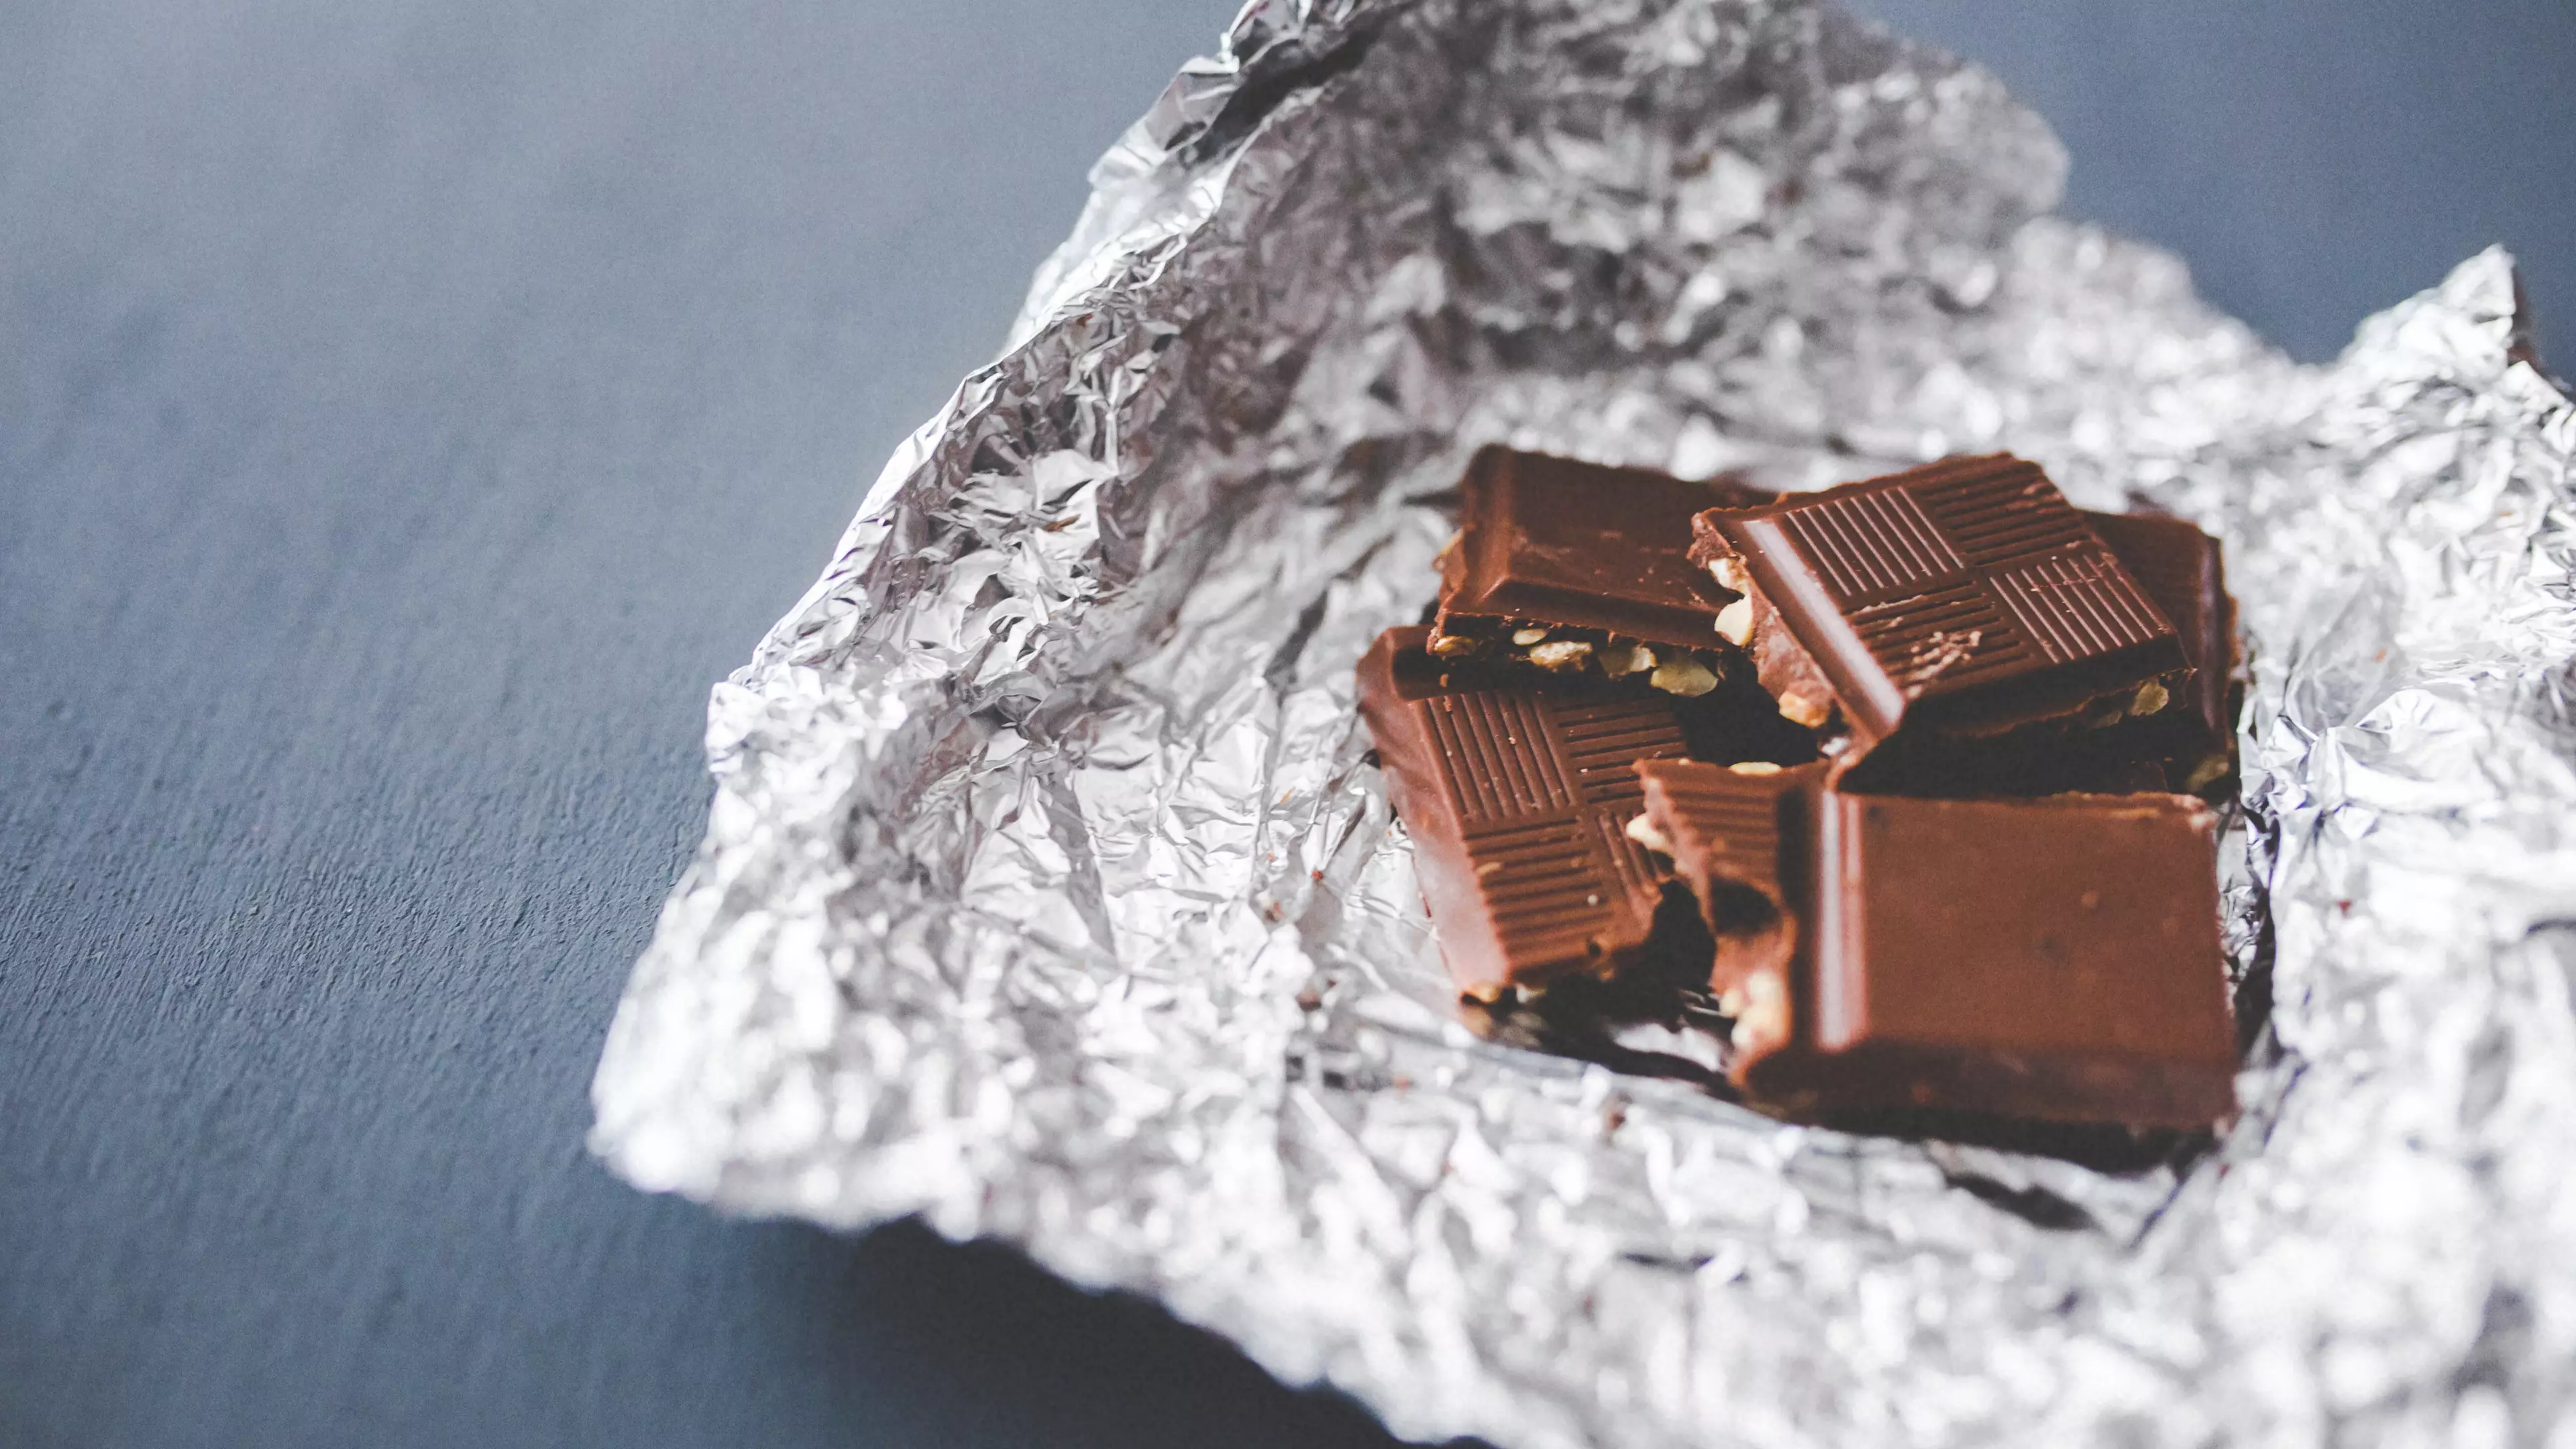 Eating Chocolate More Than Once A Week Can Help Reduce Heart Disease, New Study Finds